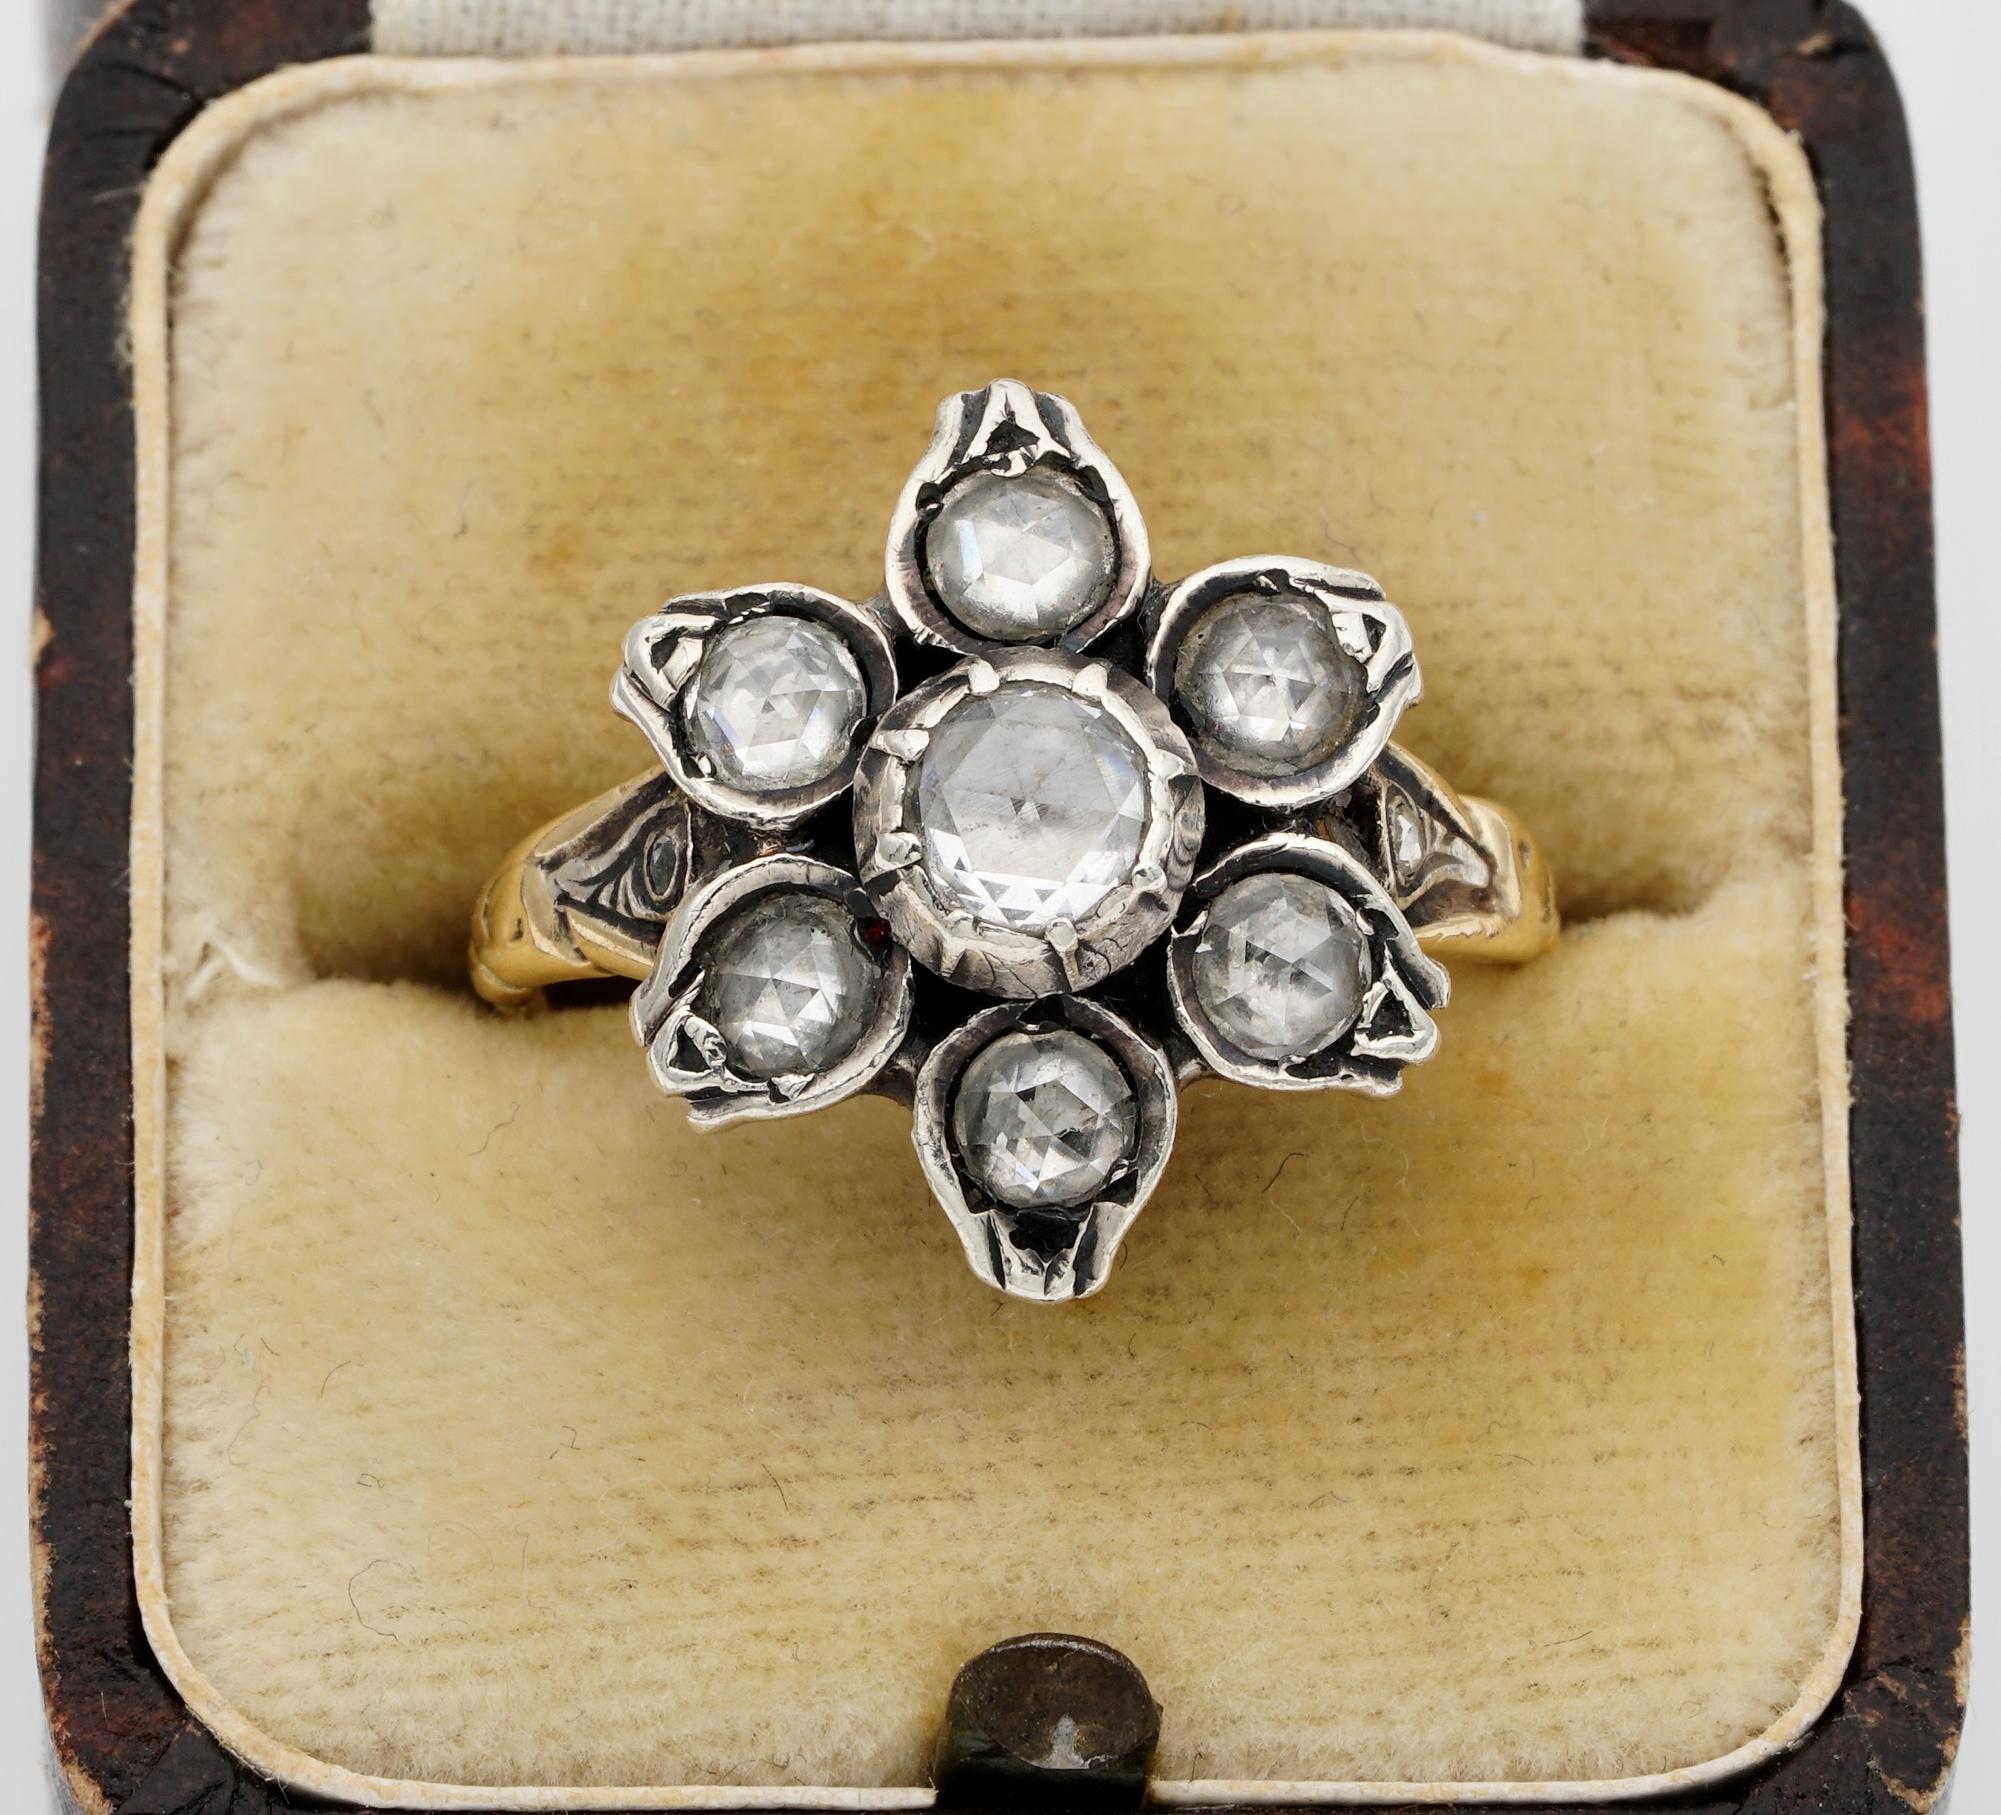 Marie Antoinette Lovely Flower

Charming witness of past history, glorious Georgian period of the finest workmanship, nature inspired Flower ring
1790 – 1800 ca Designed to be for ever, very well constructed of solid 18 KT solid gold and silver